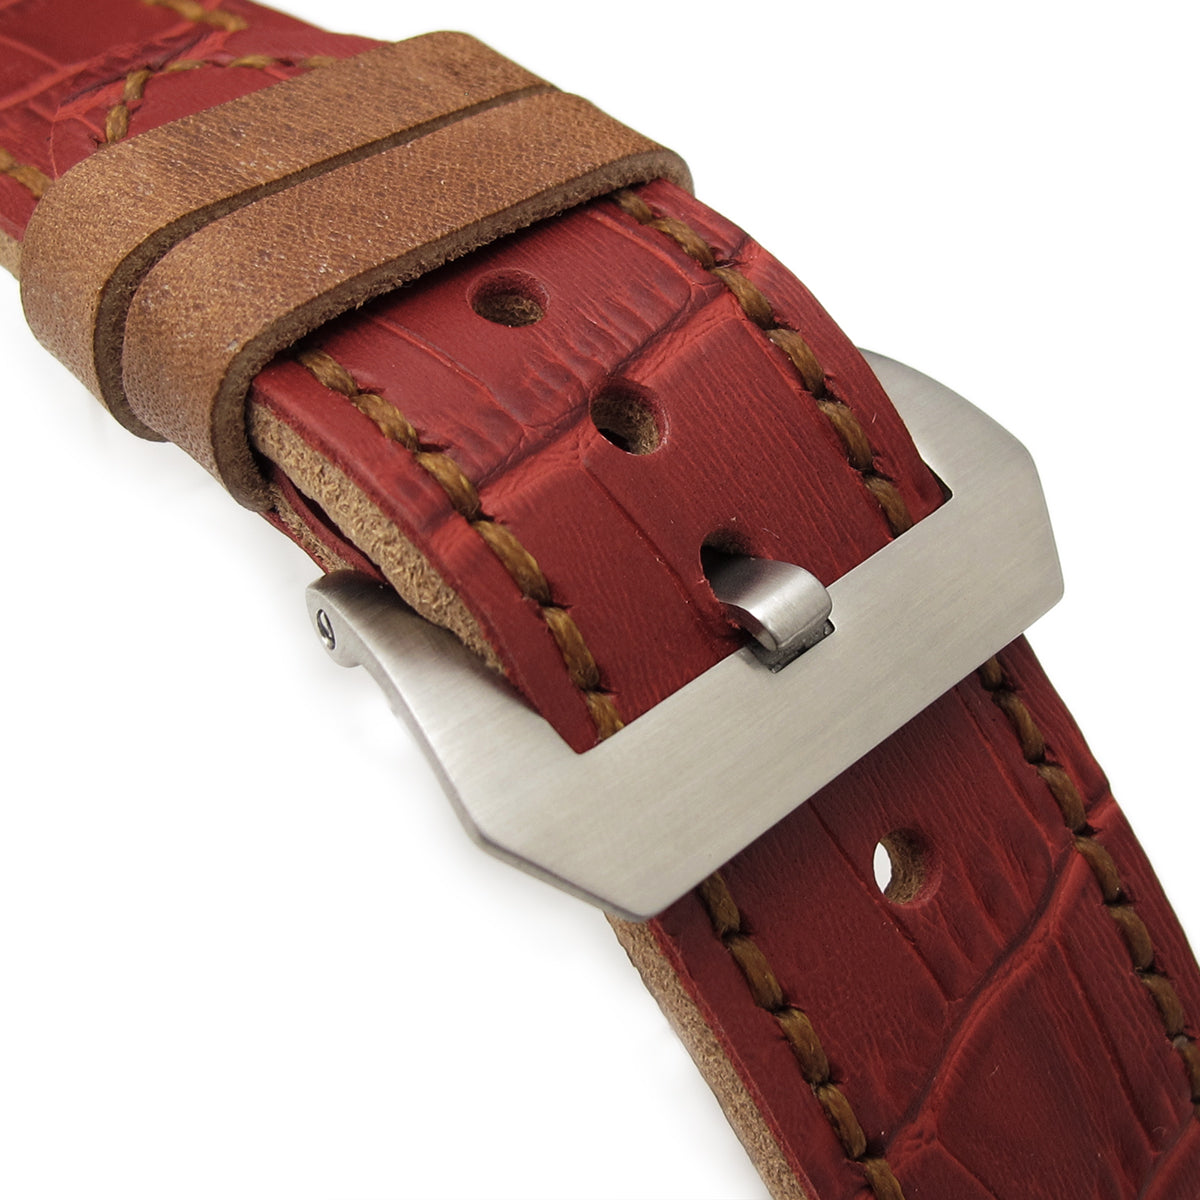 26mm MiLTAT Antipode Watch Strap Matte Red CrocoCalf in Tan Hand Stitches Strapcode Watch Bands